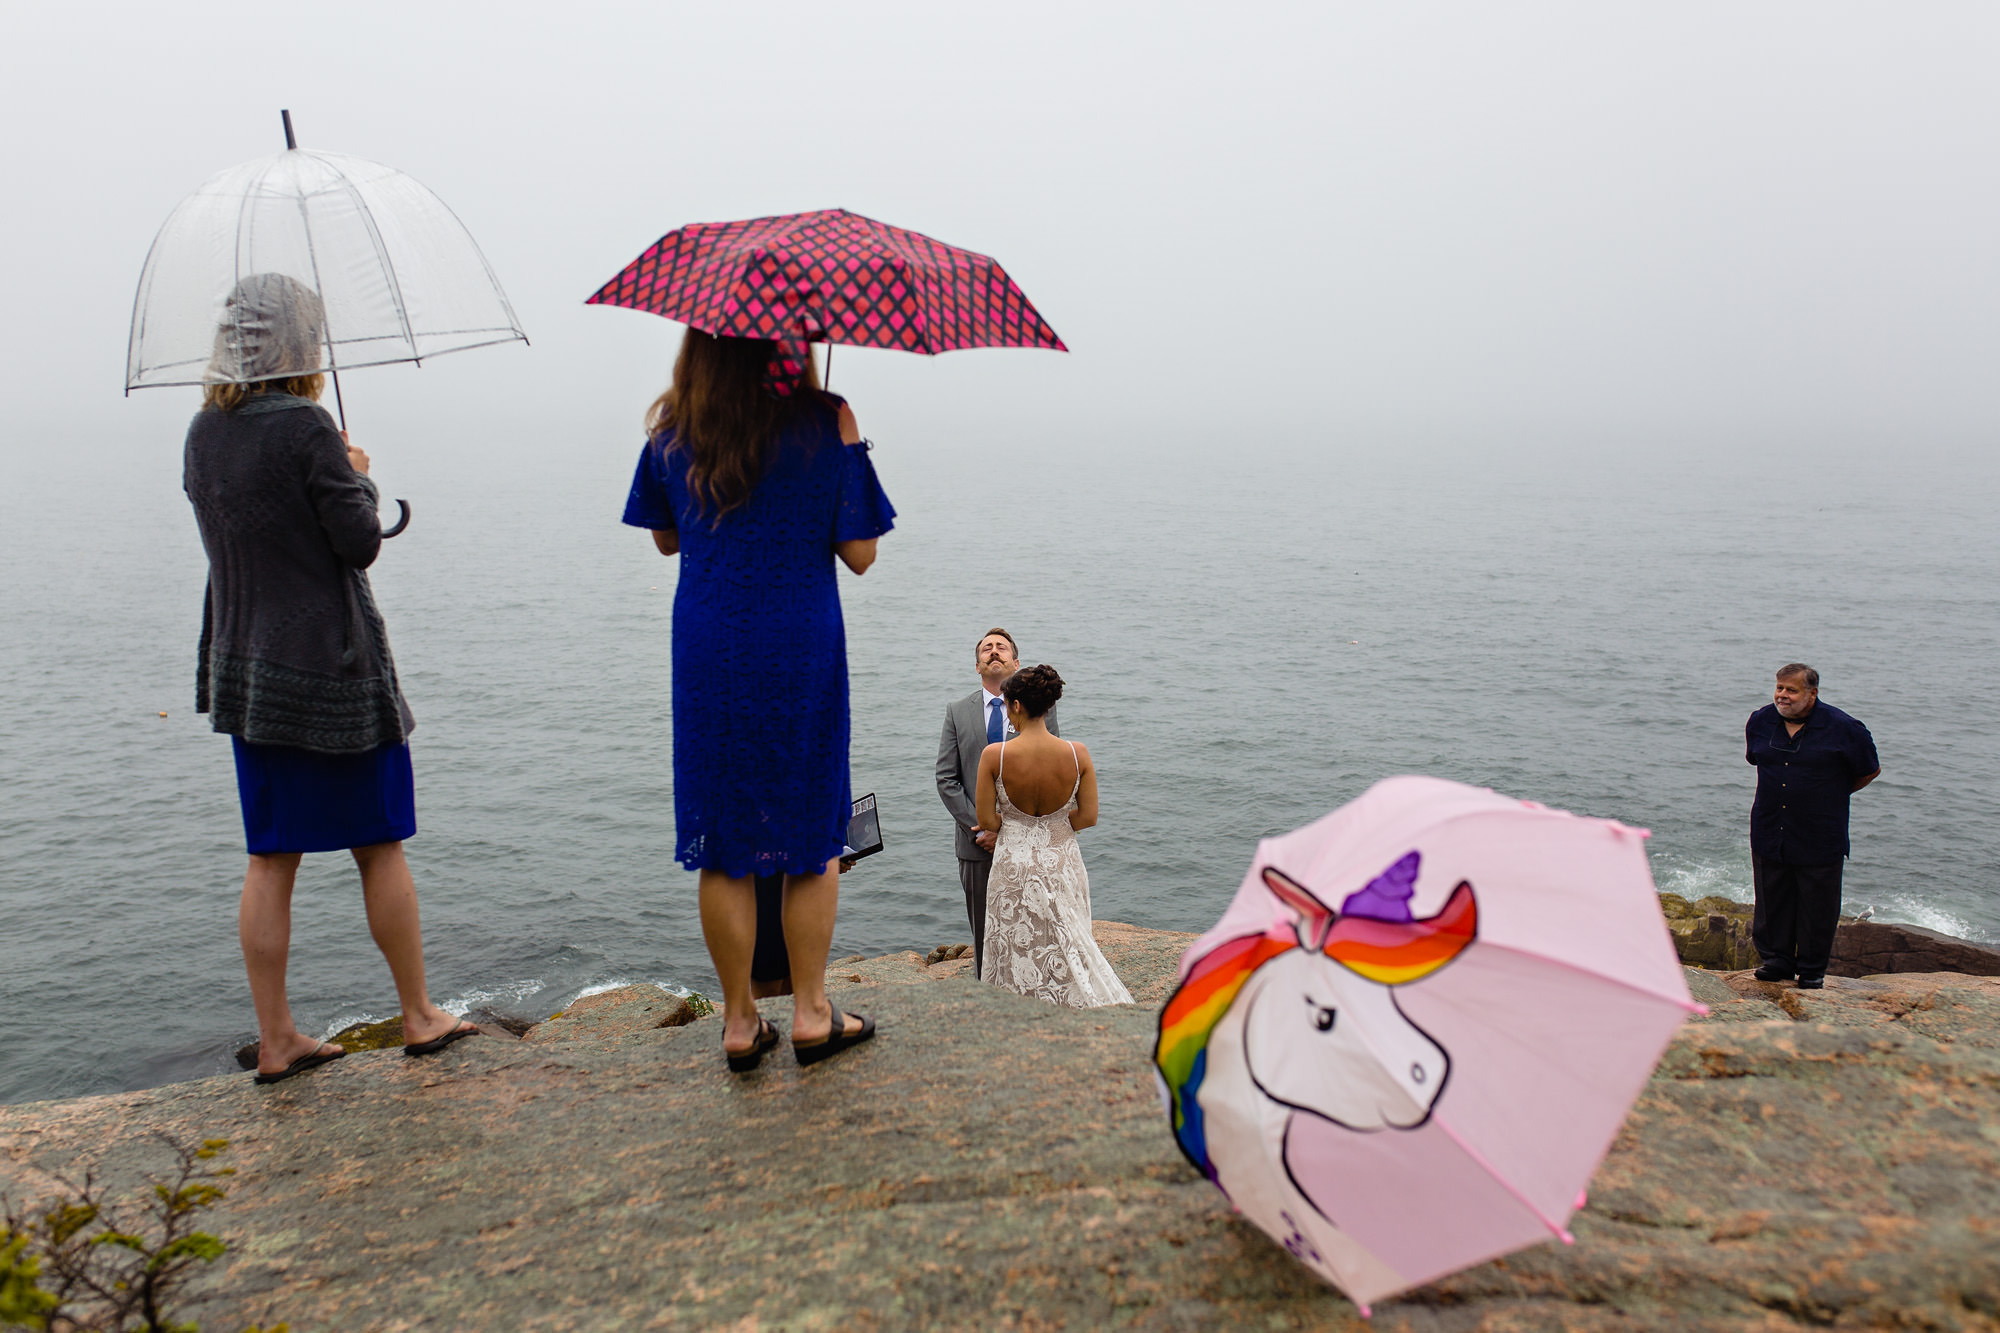 A rainy elopement in Acadia National Park